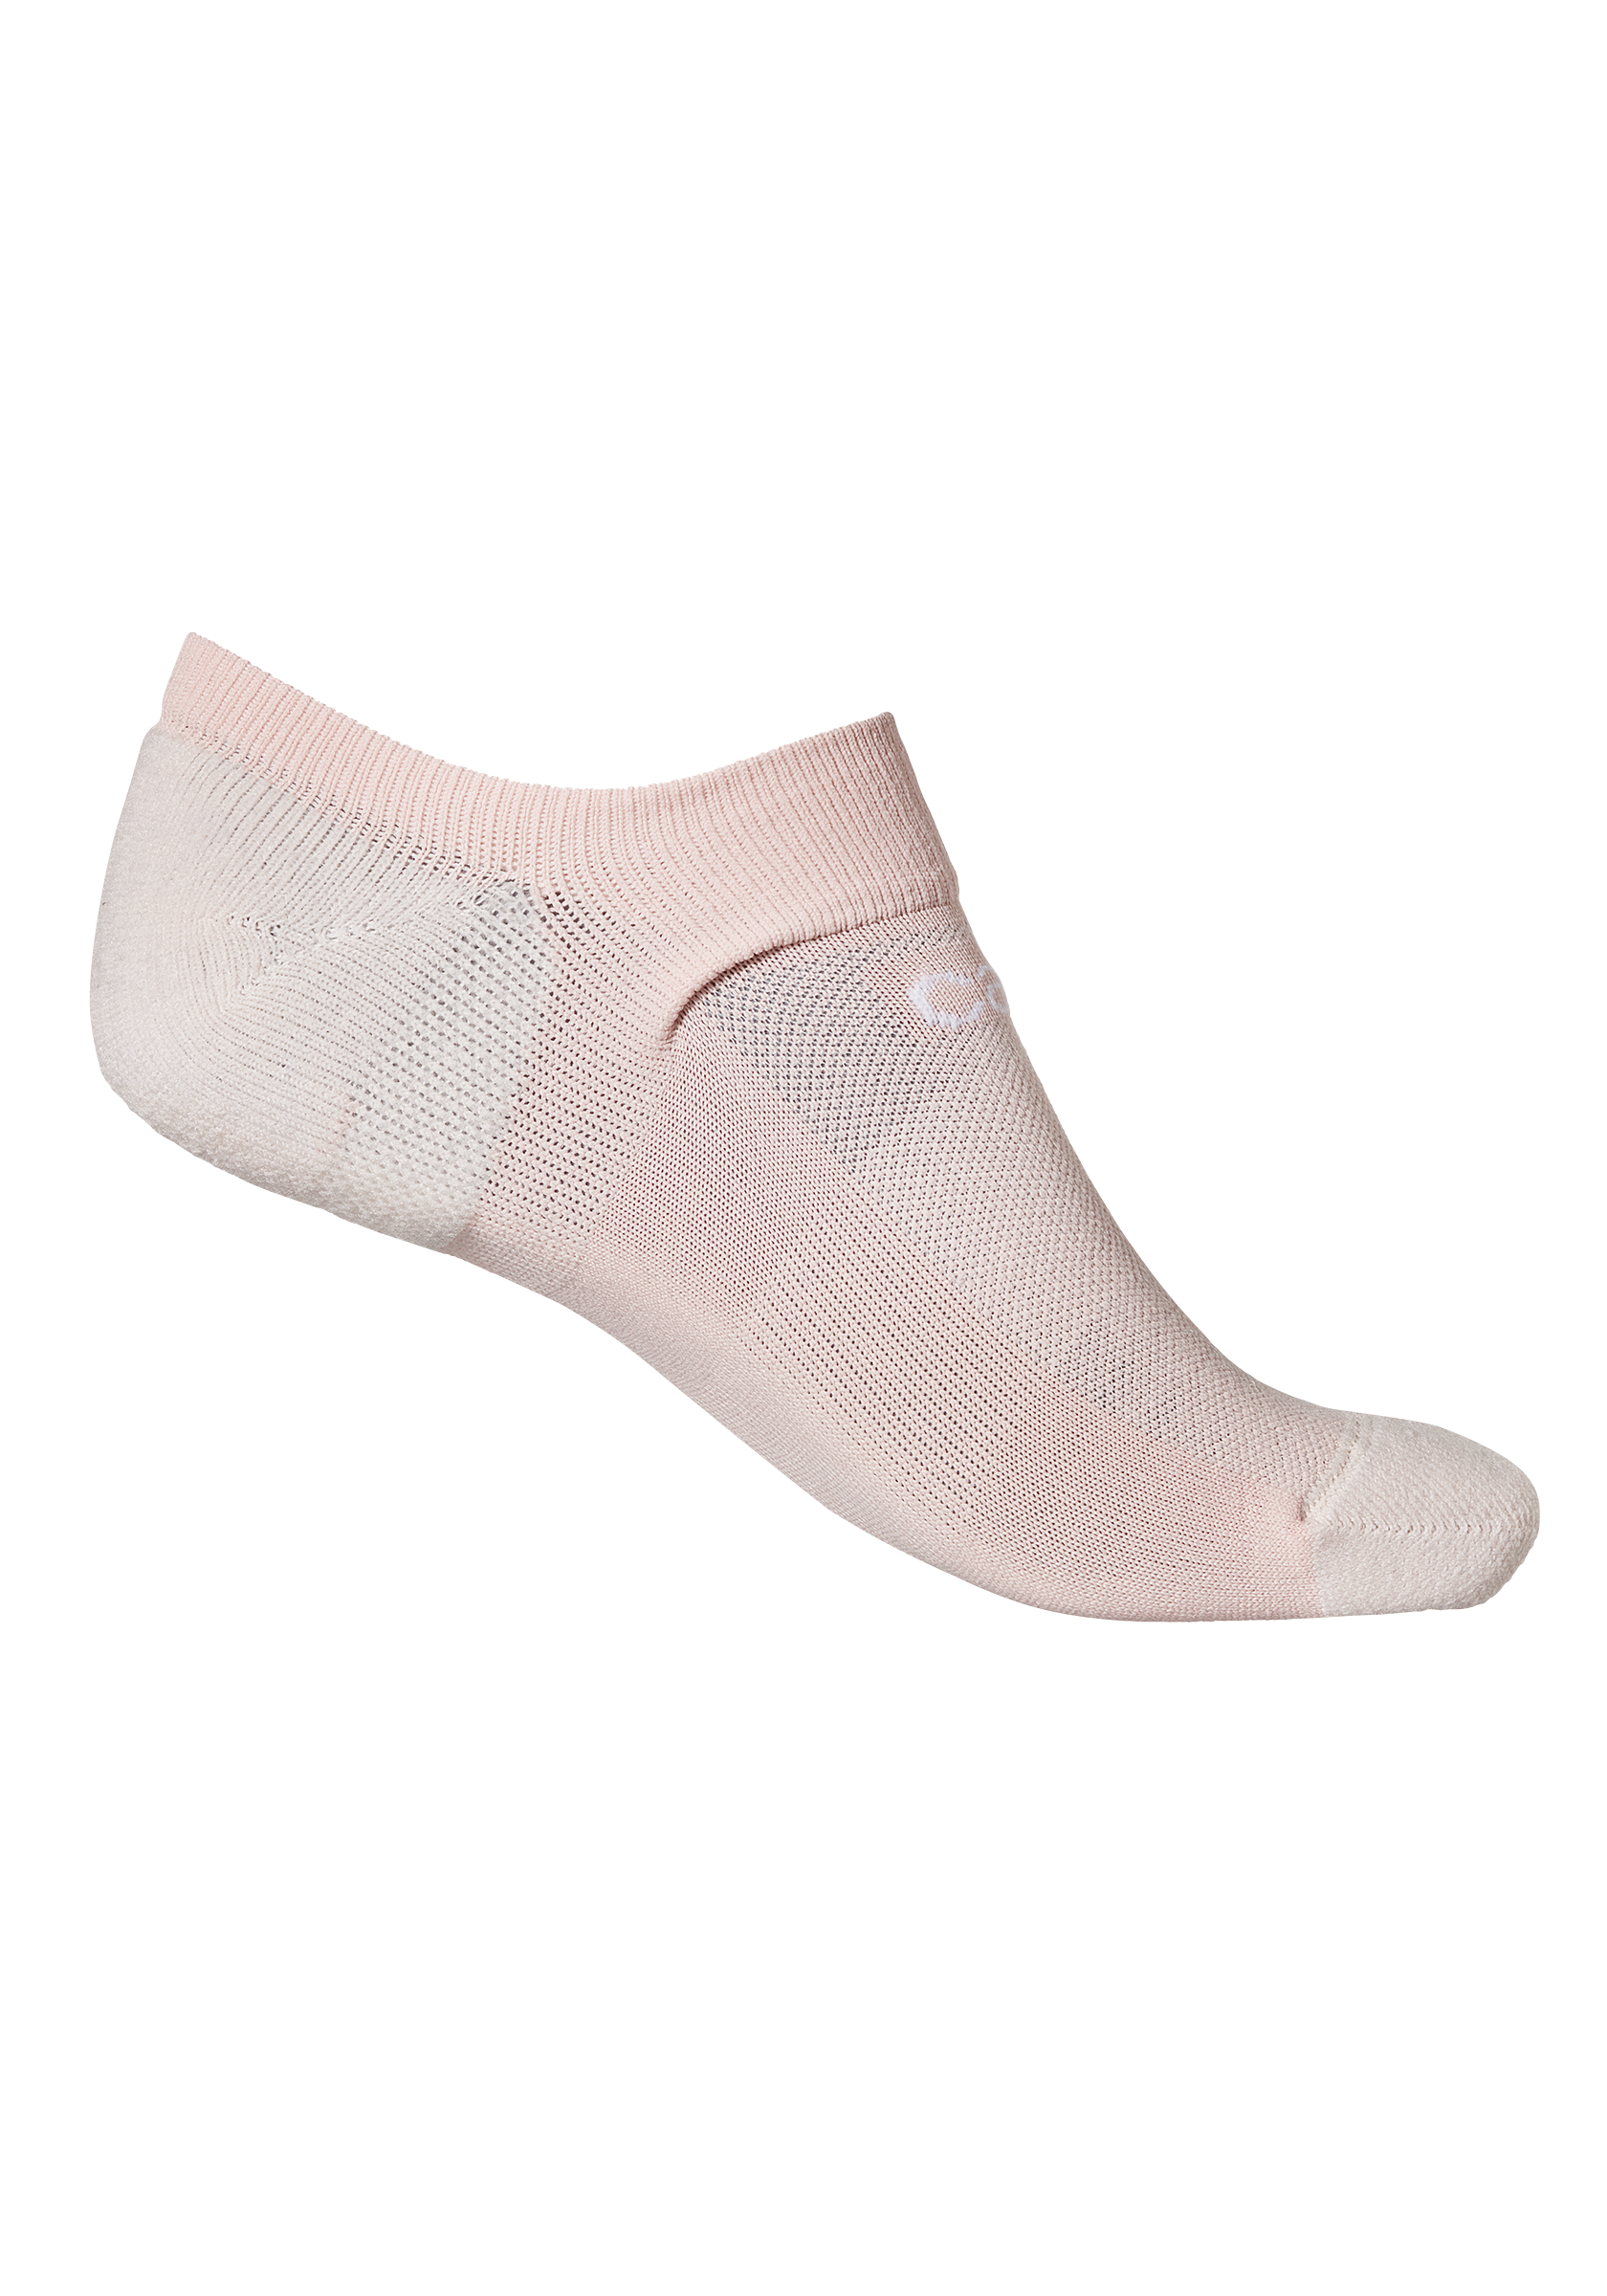 Traning sock - Lucky pink